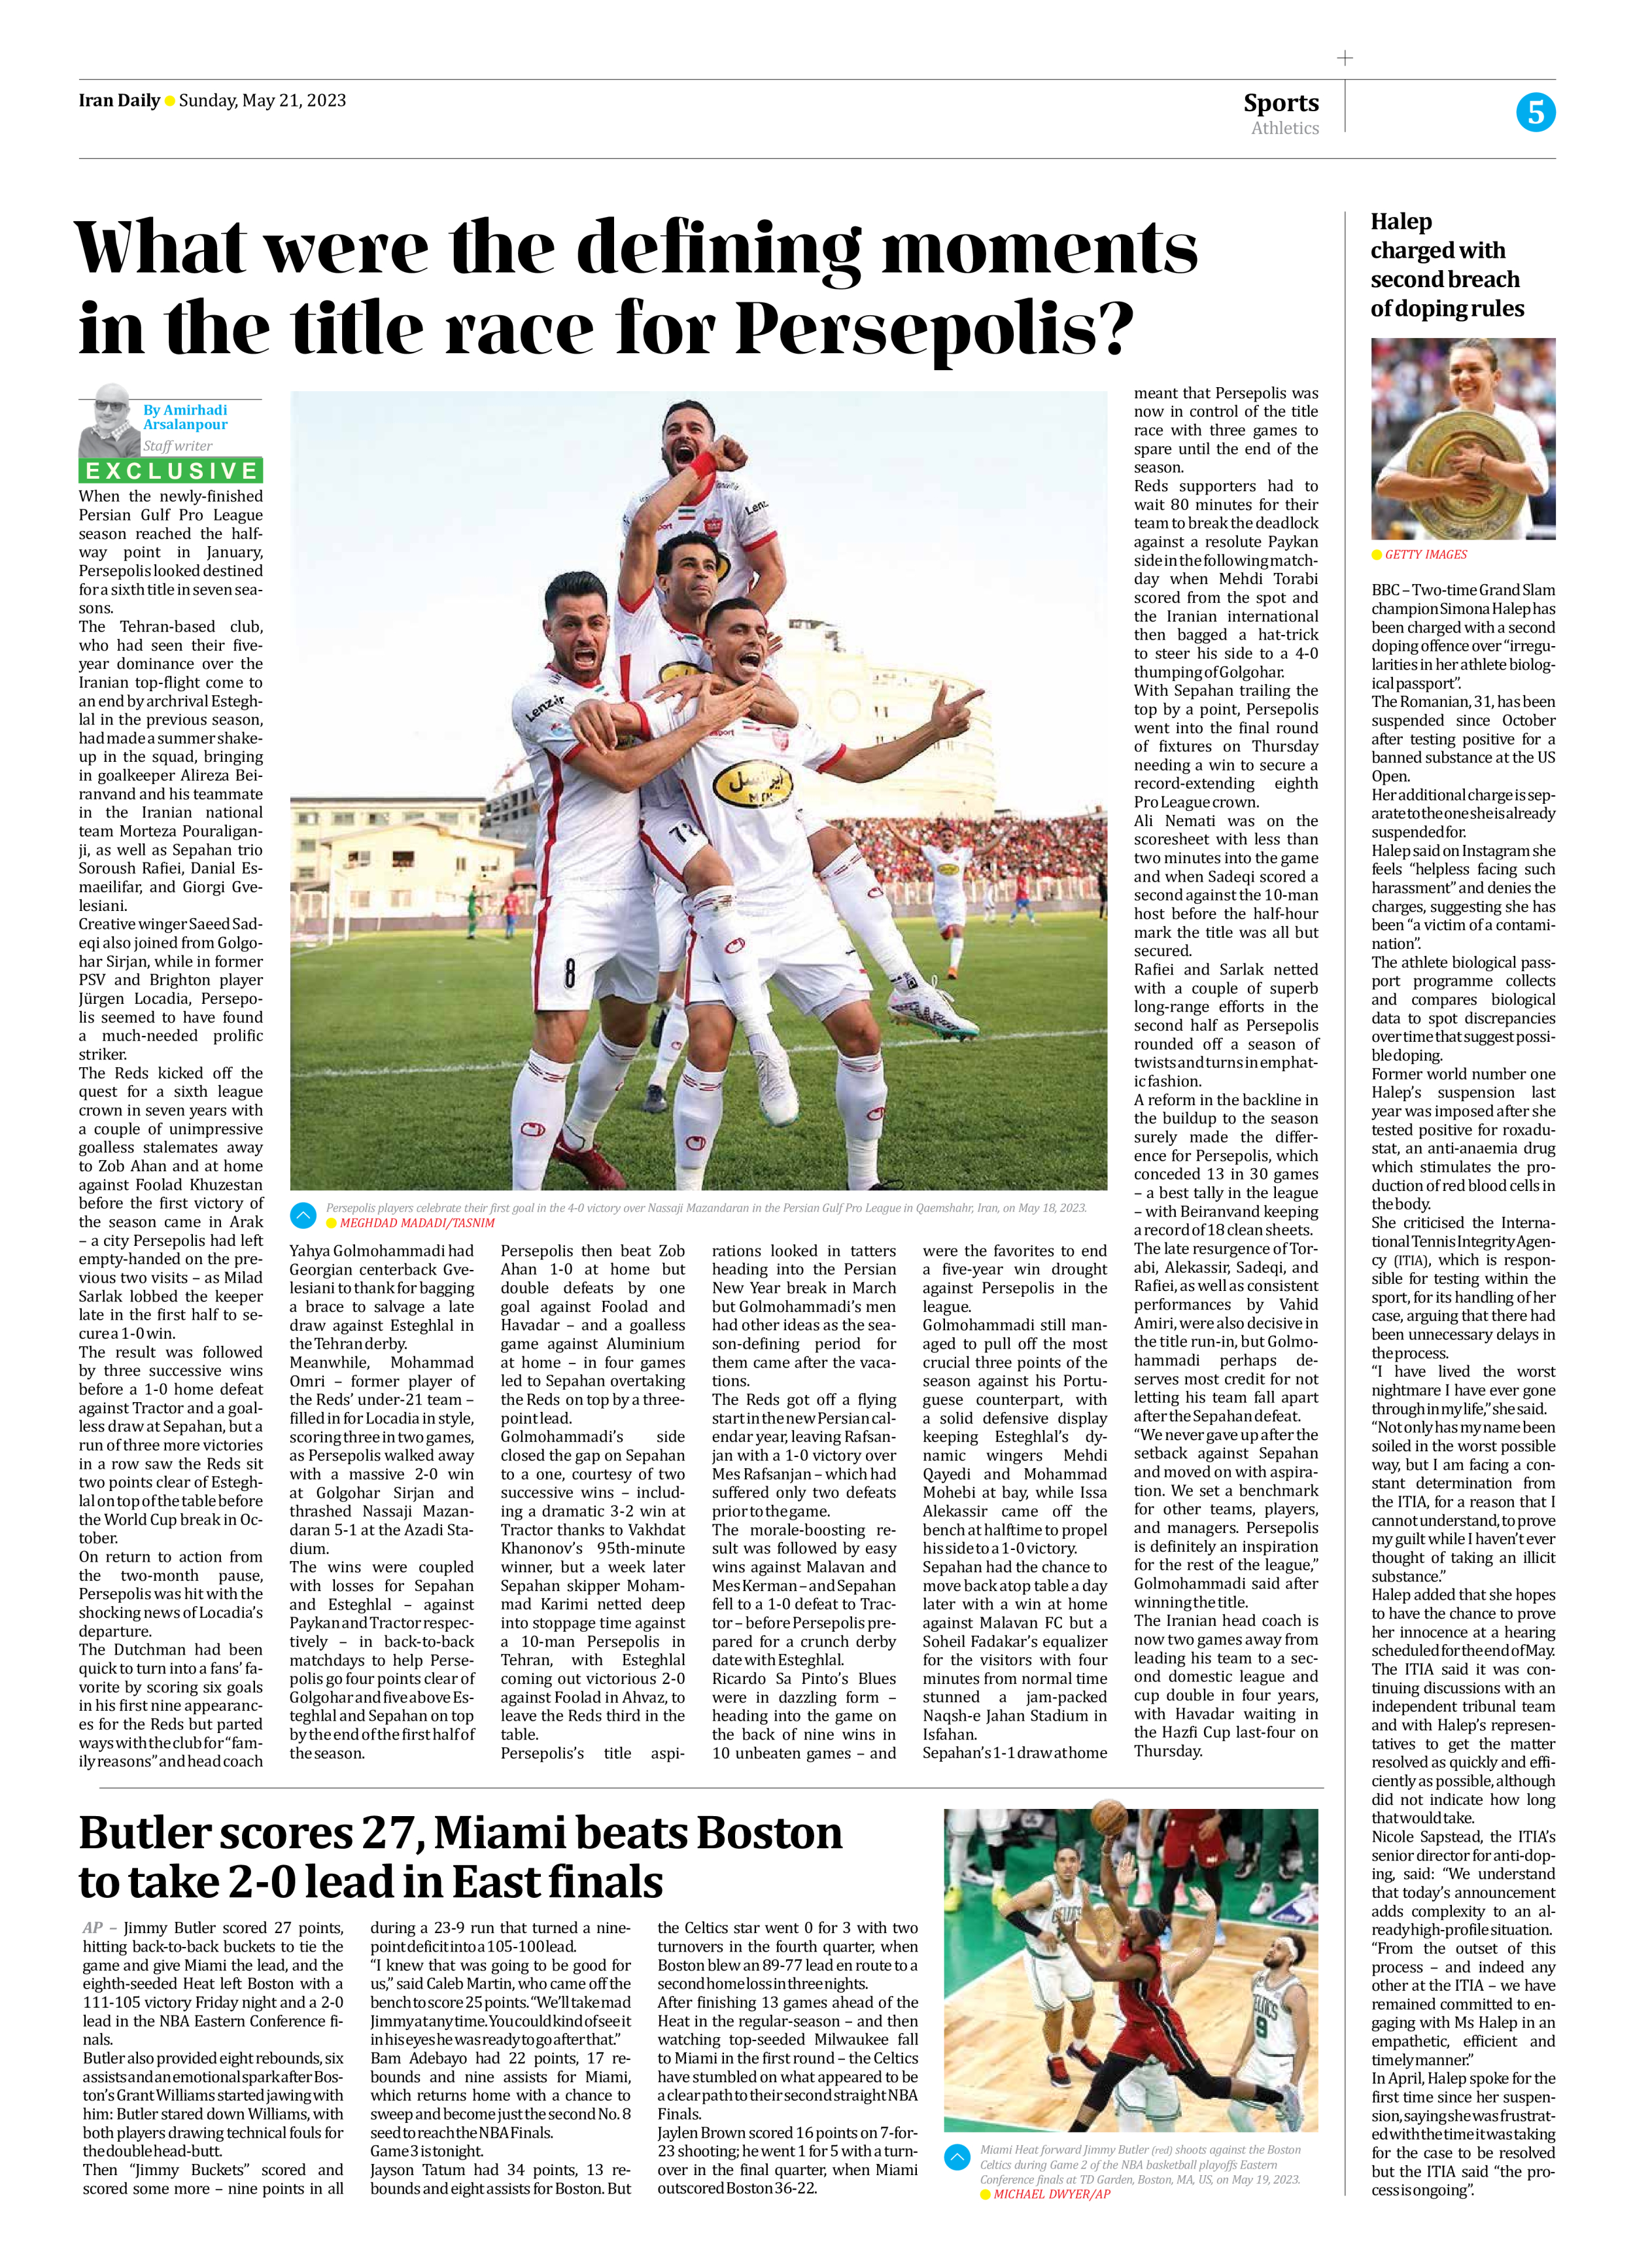 Iran Daily - Number Seven Thousand Two Hundred and Ninety Six - 21 May 2023 - Page 5